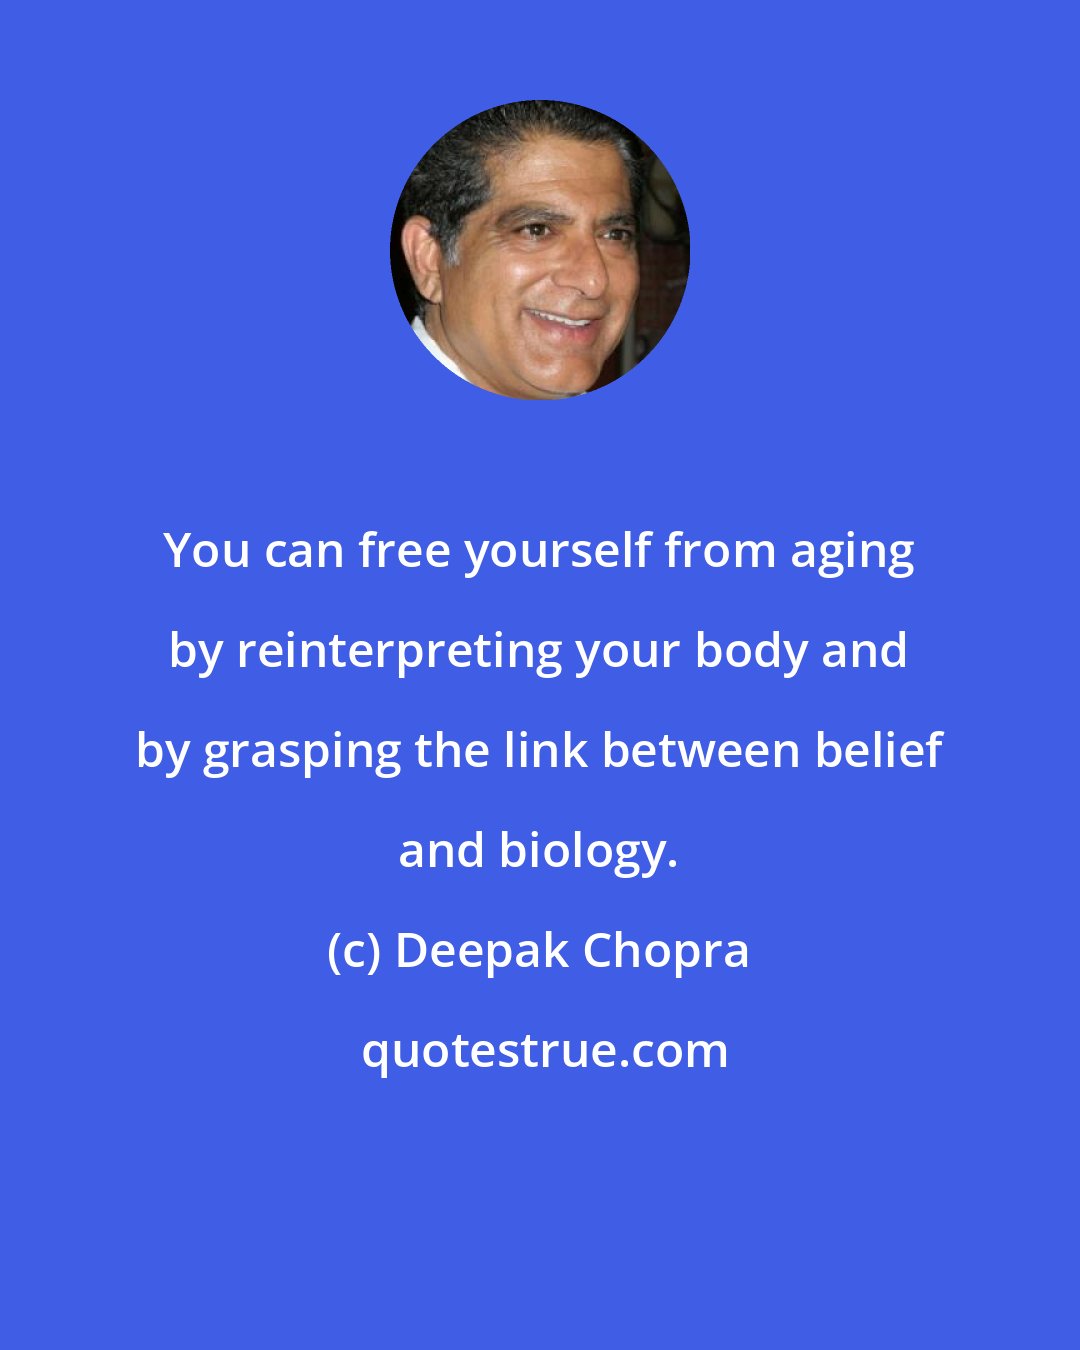 Deepak Chopra: You can free yourself from aging by reinterpreting your body and by grasping the link between belief and biology.